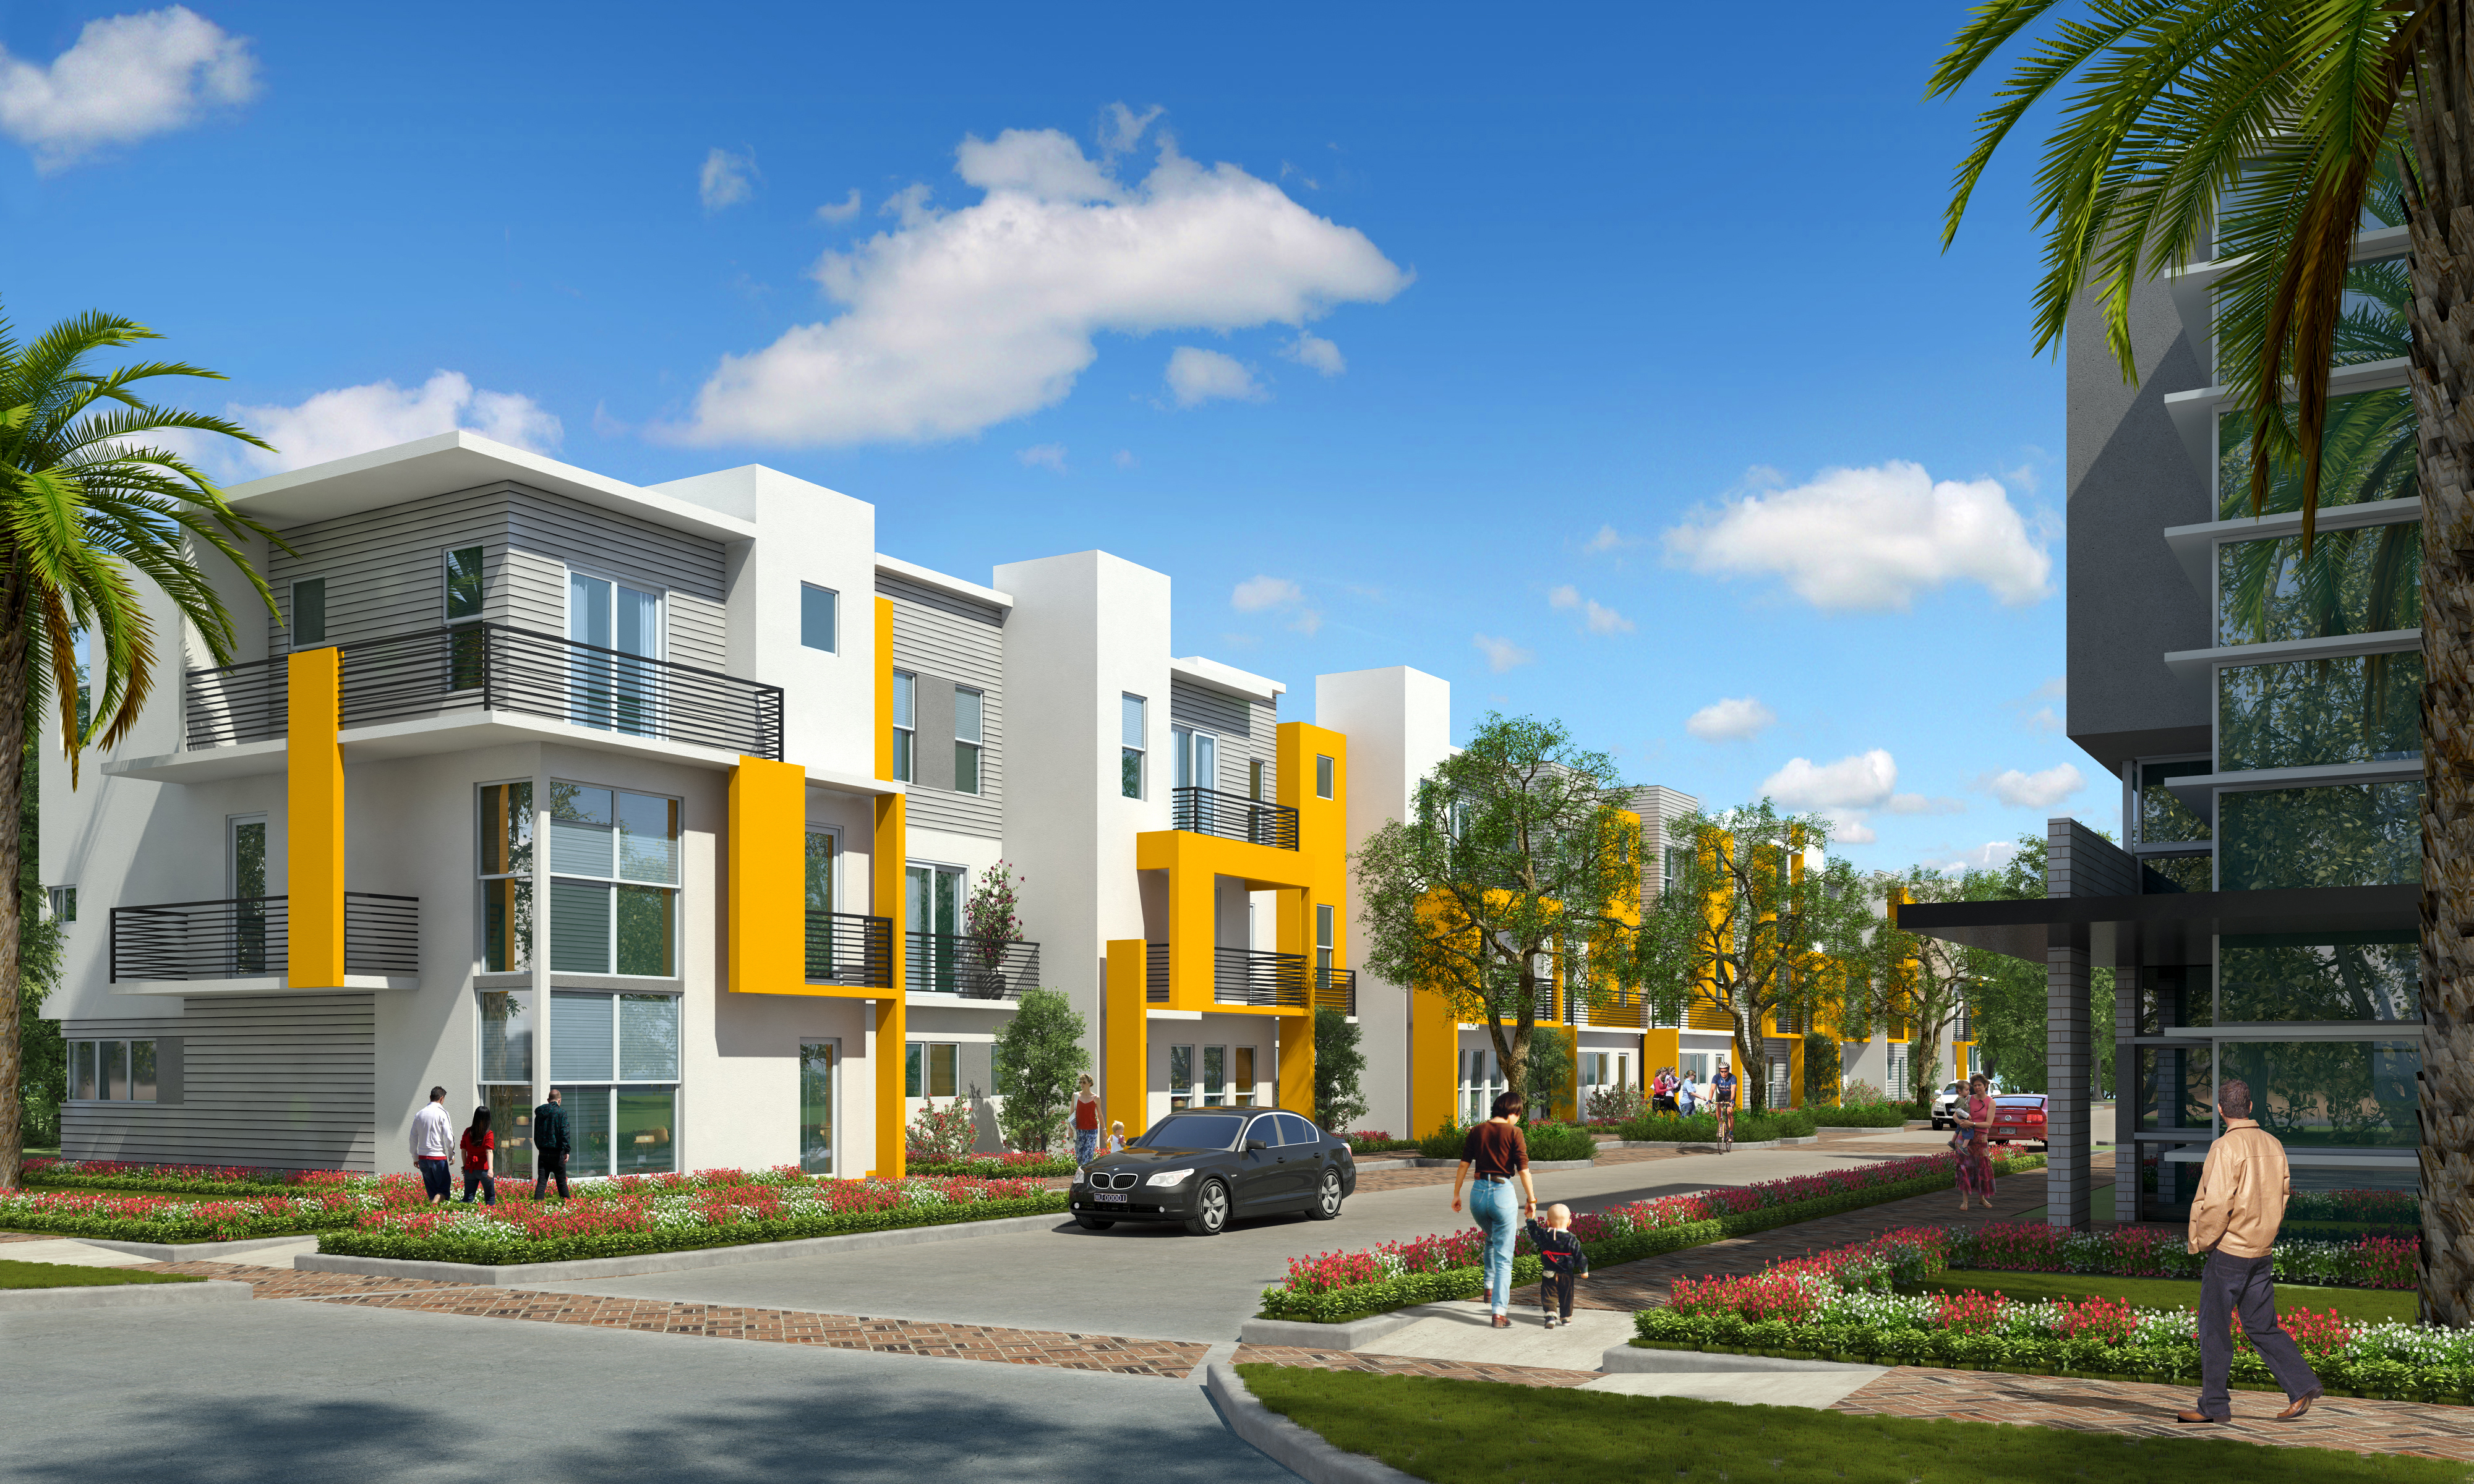 Rendering APOC Townhouses (Credit: RLC Architects)